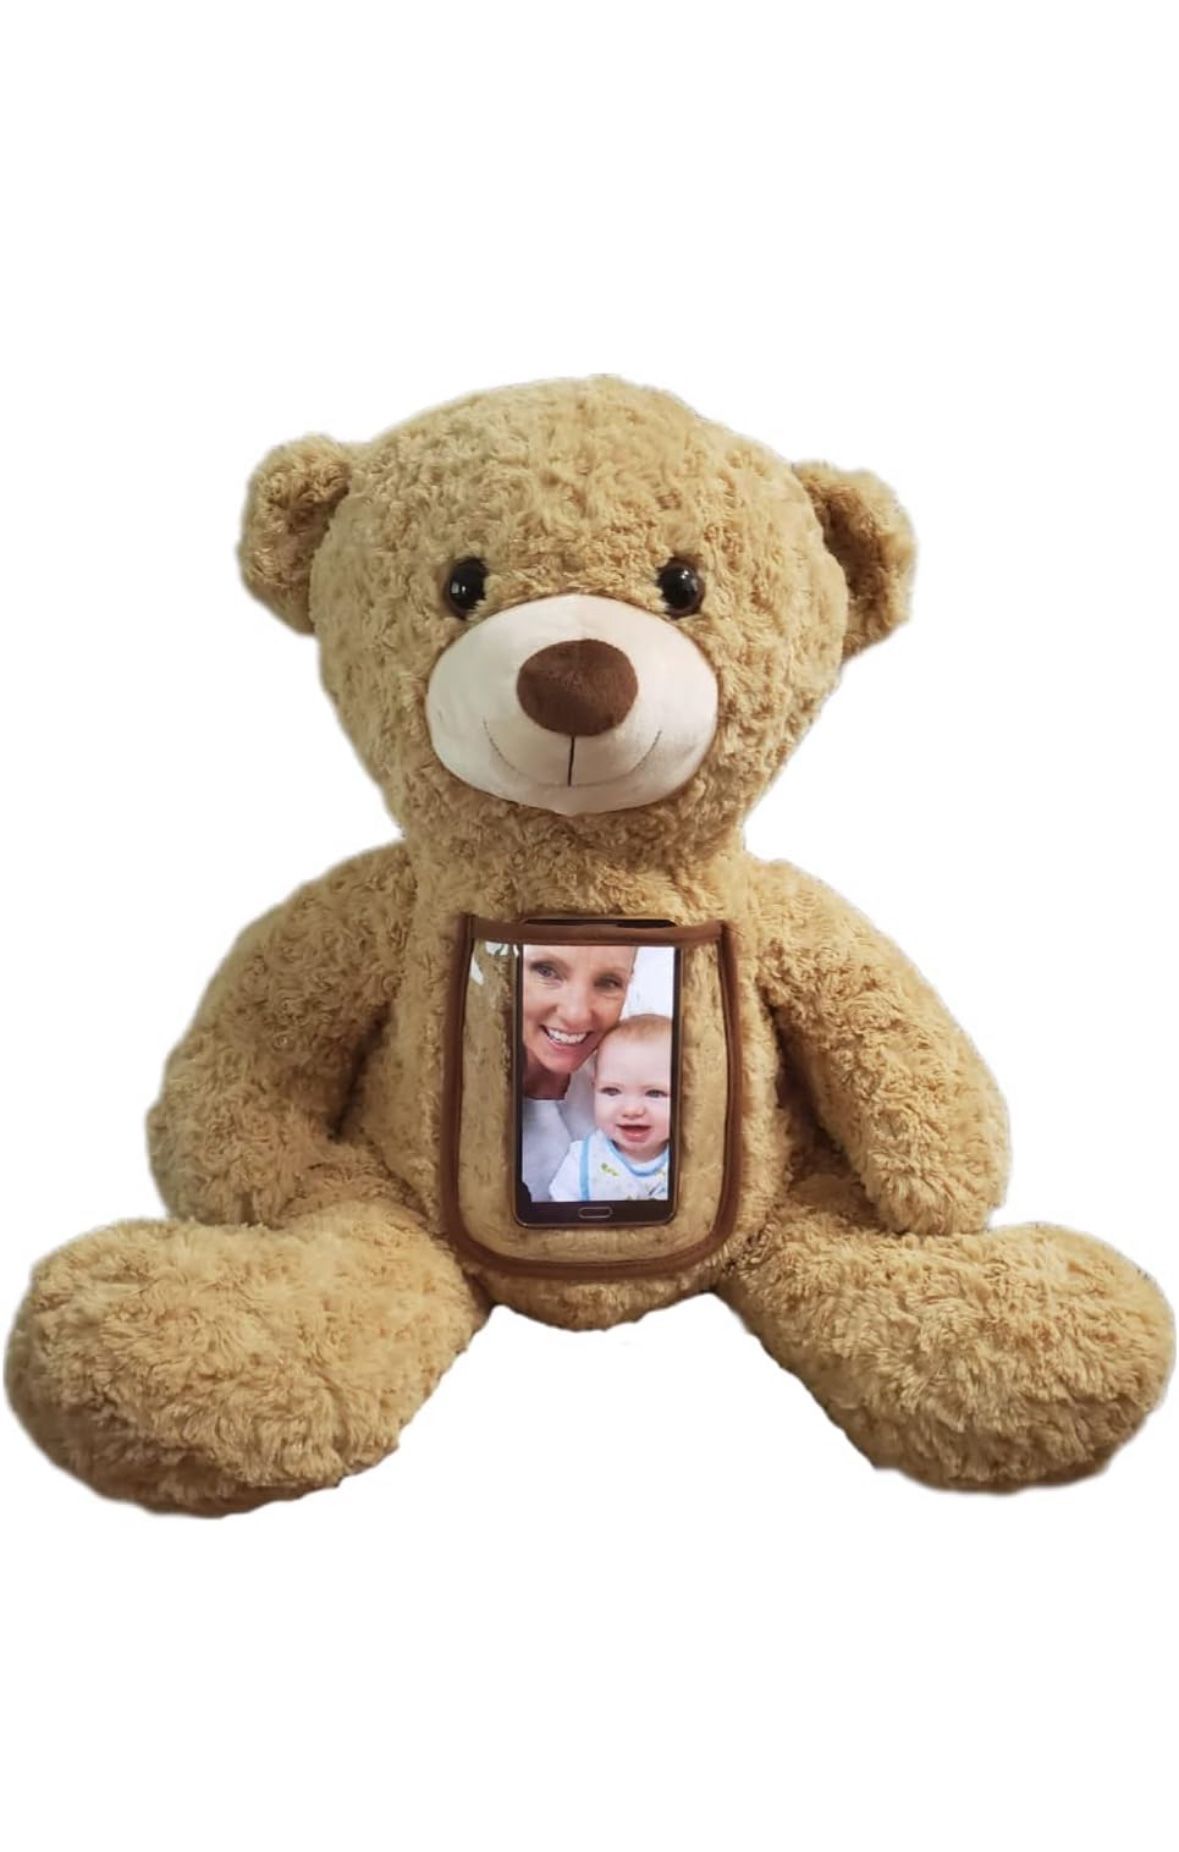 One Size Fits All Eco-Friendly Phone Stand 100% Recycled Stuffed Big Teddy Bear to Hug who You Call